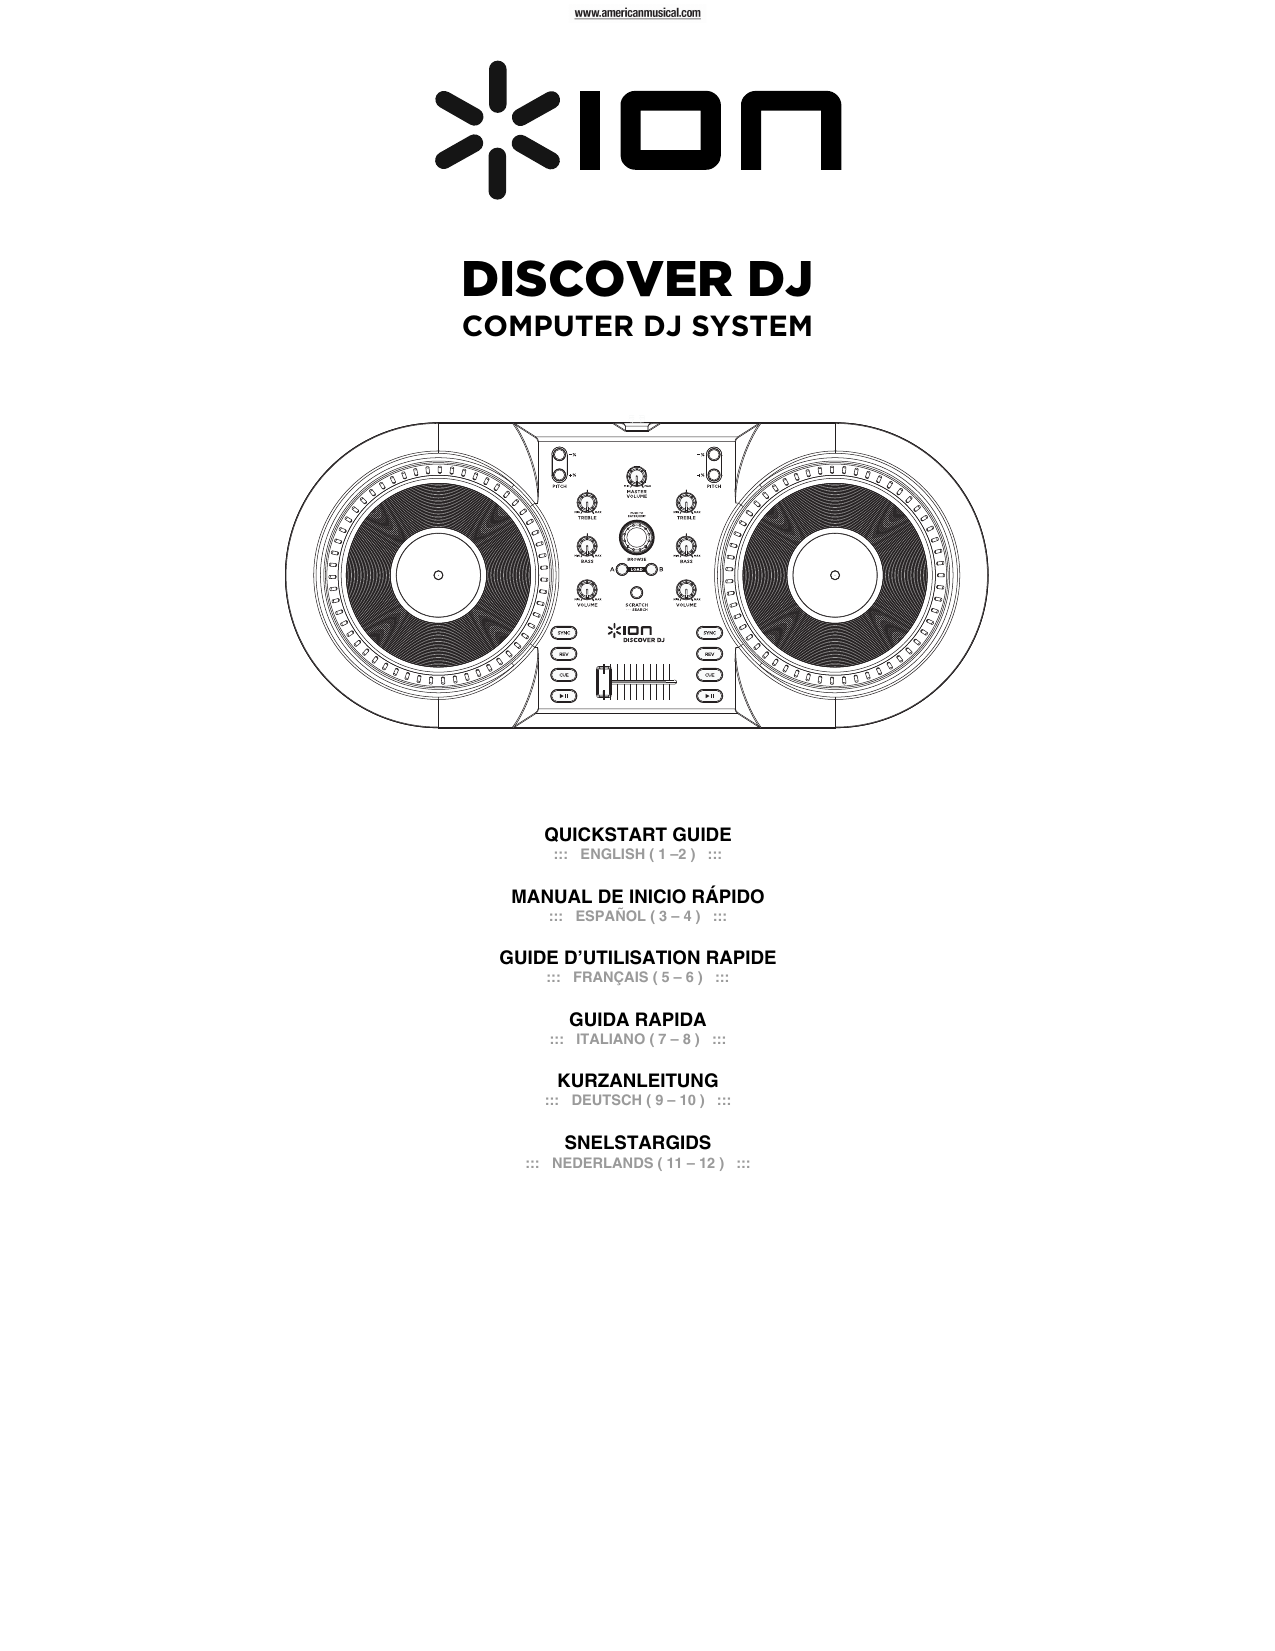 ion discover dj version 1.0 requirements